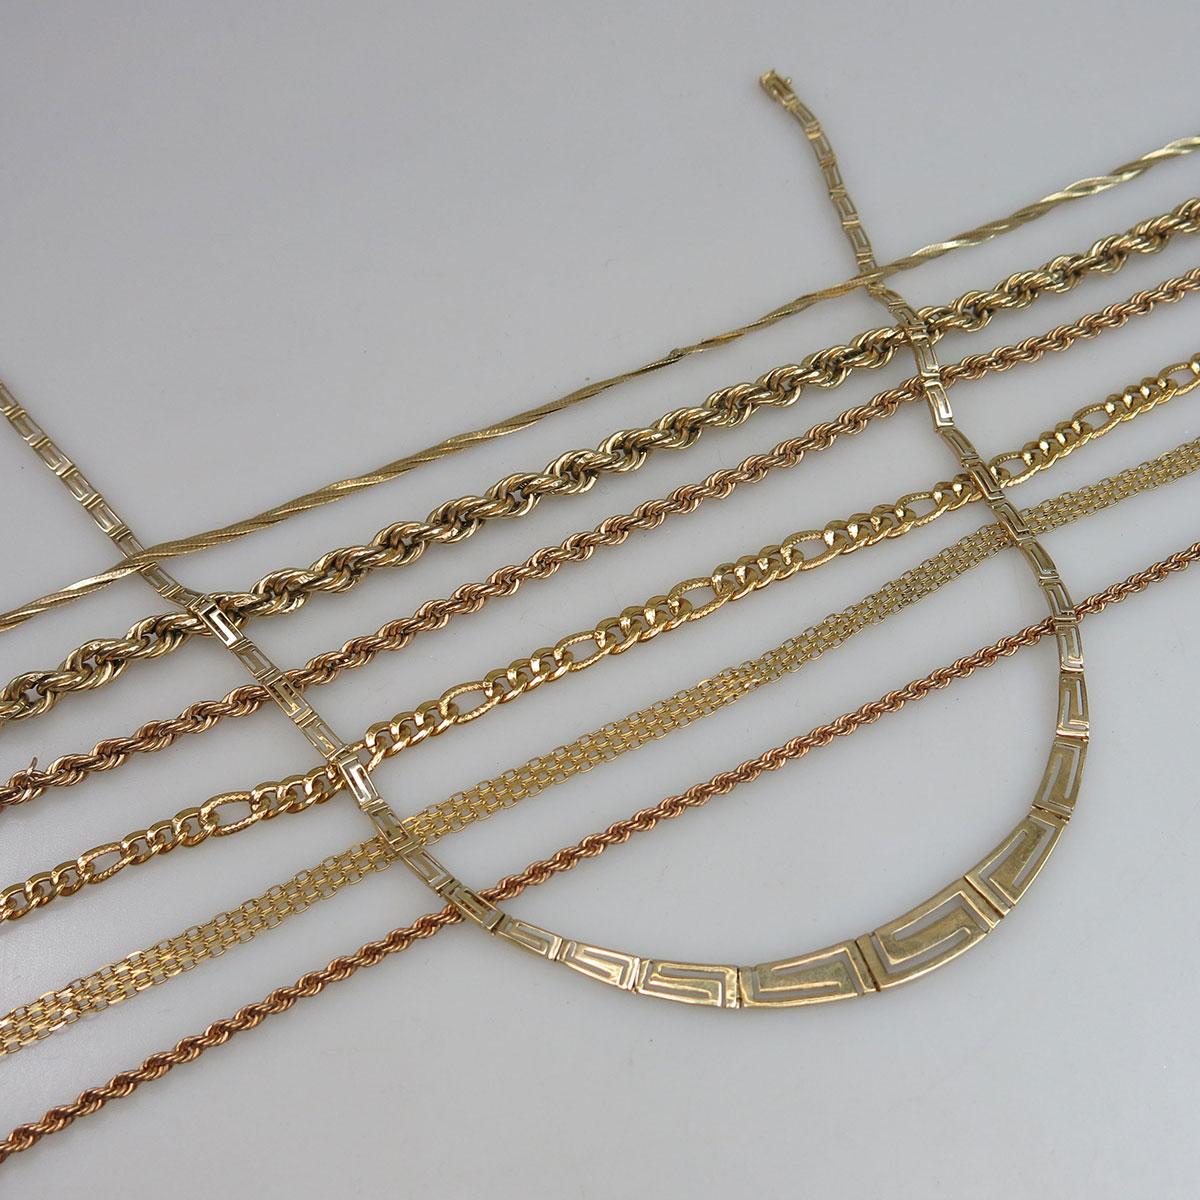 7 Various 10k Yellow Gold Chains